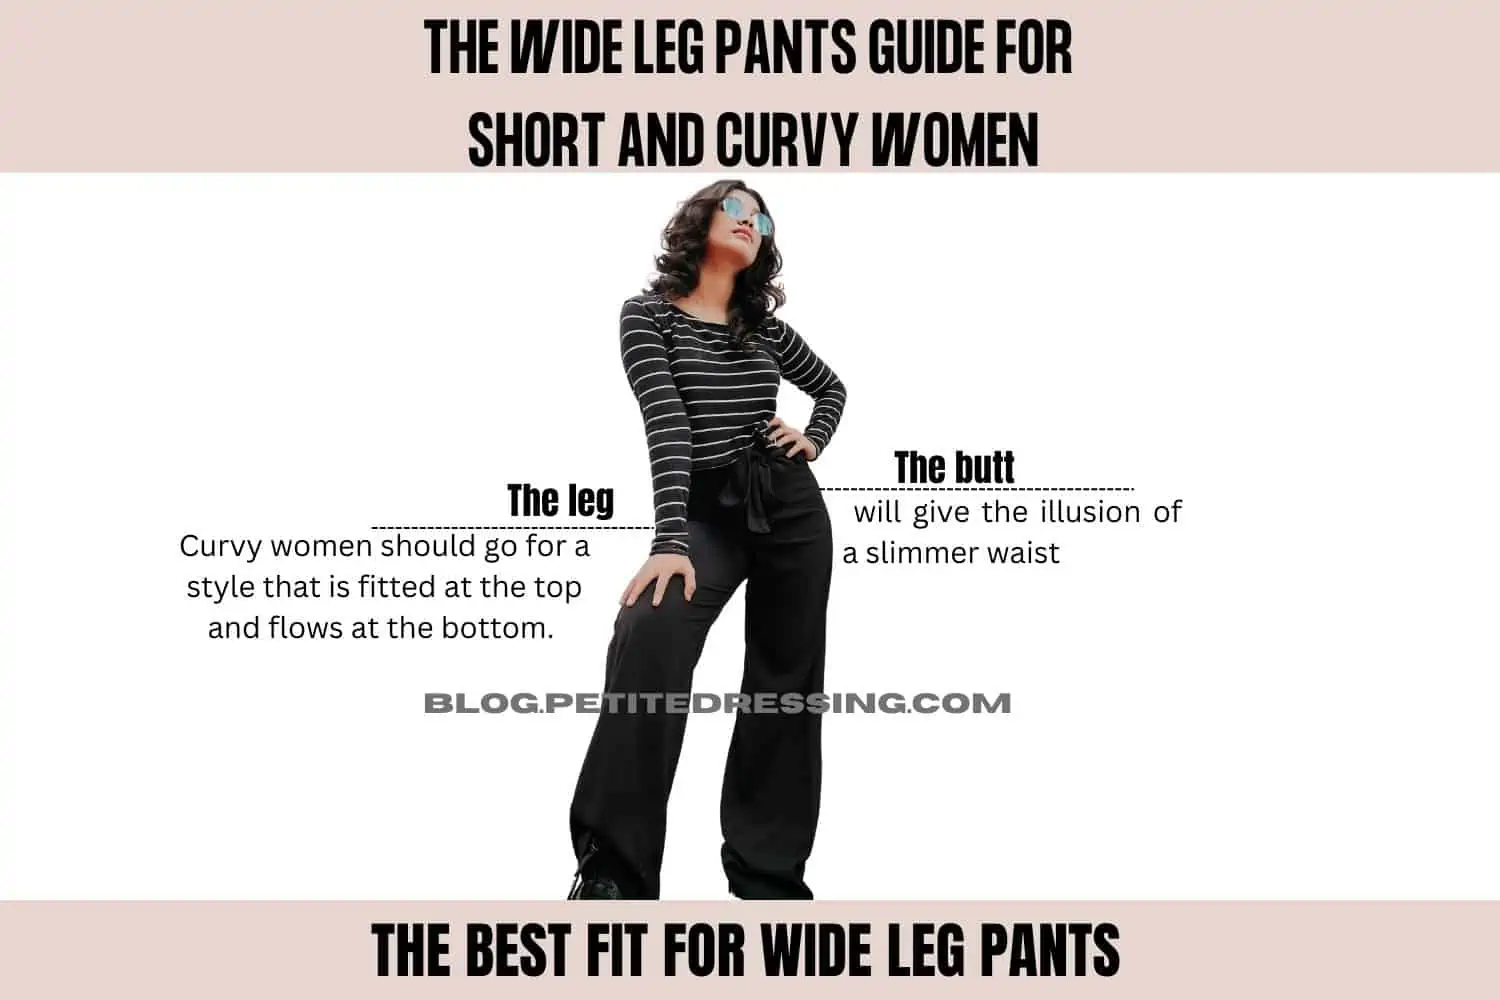 The Wide Leg Pants Guide for Short and Curvy Women - Petite Dressing